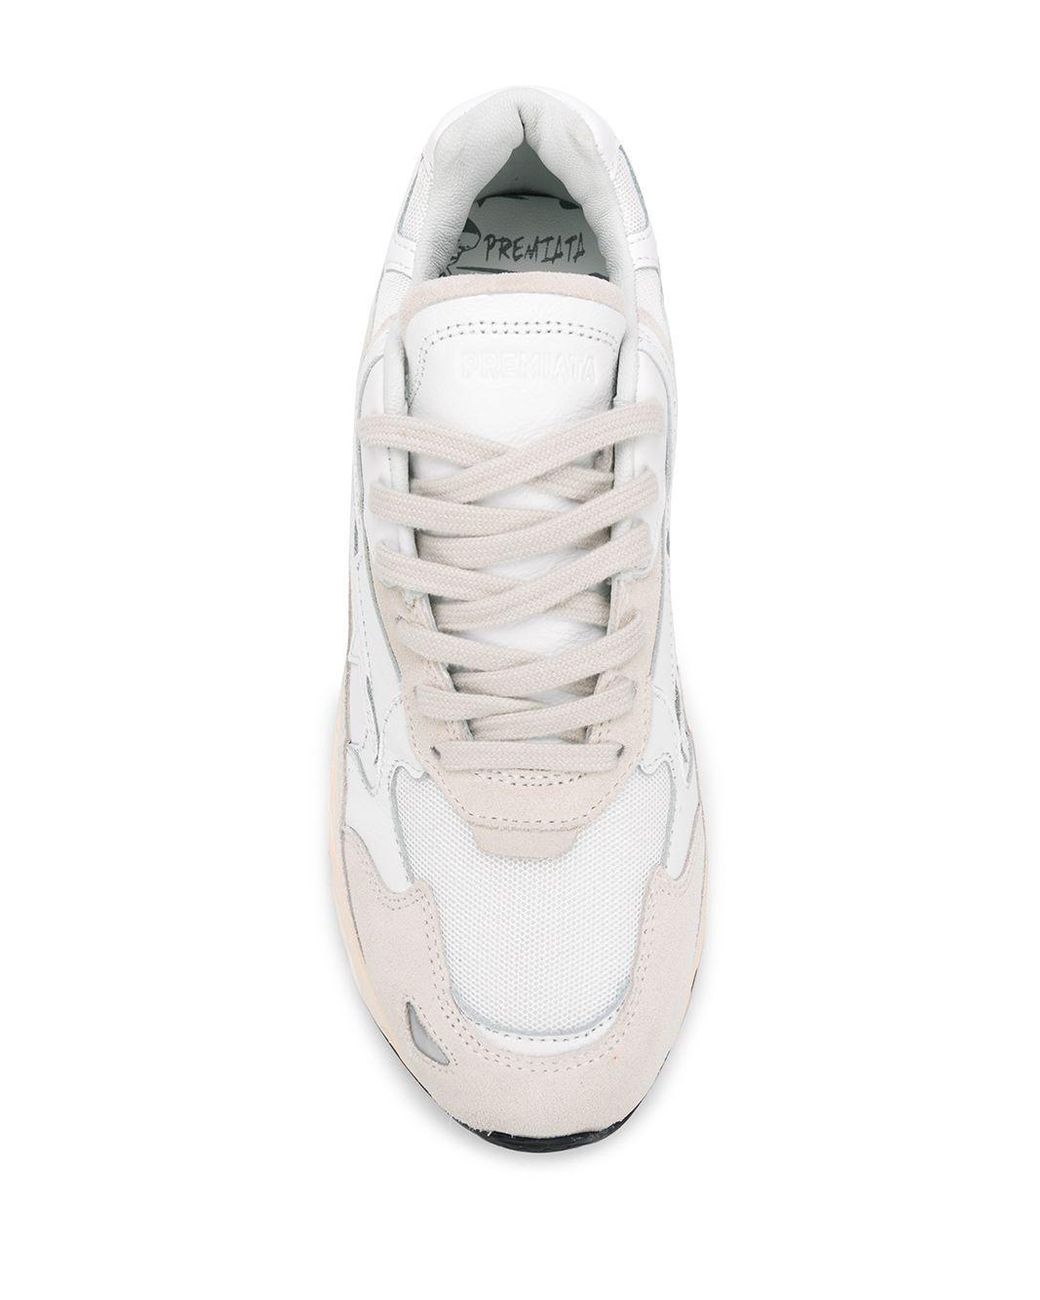 Premiata Sharky Panelled Sneakers in White | Lyst